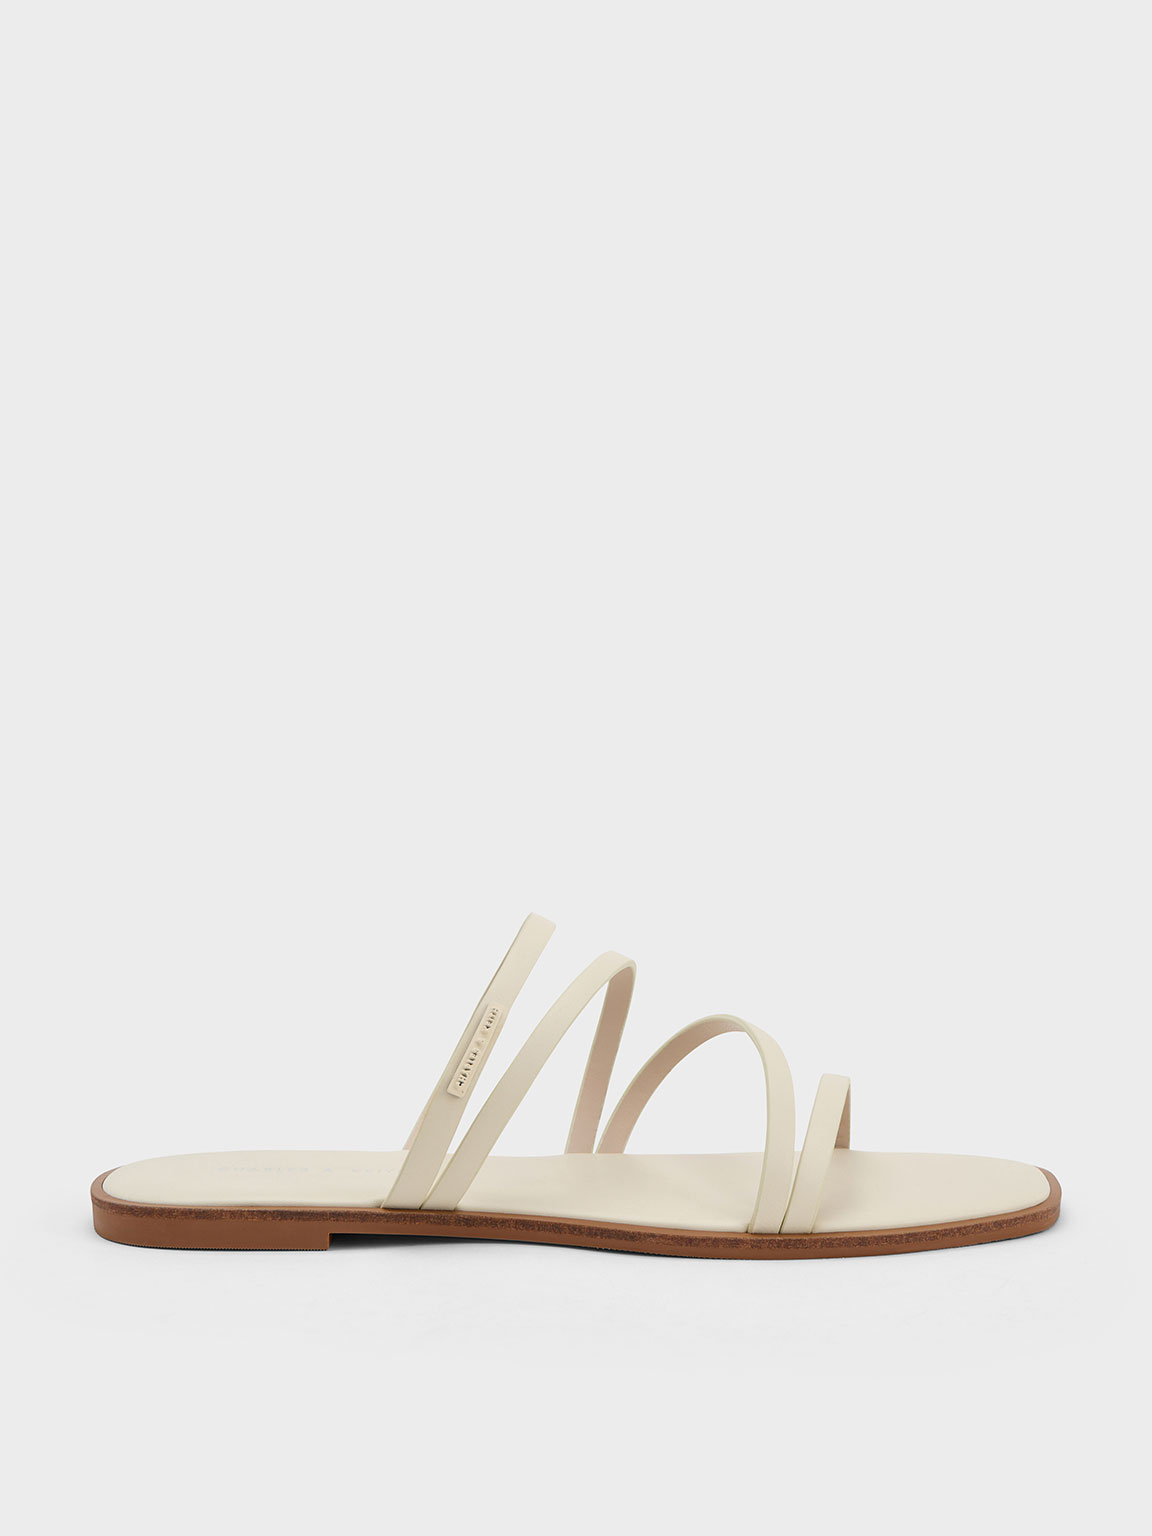 Los Cabos Spaghetti | Women Sling Back Sandals | Flat Sandals – Los Cabos  shoes